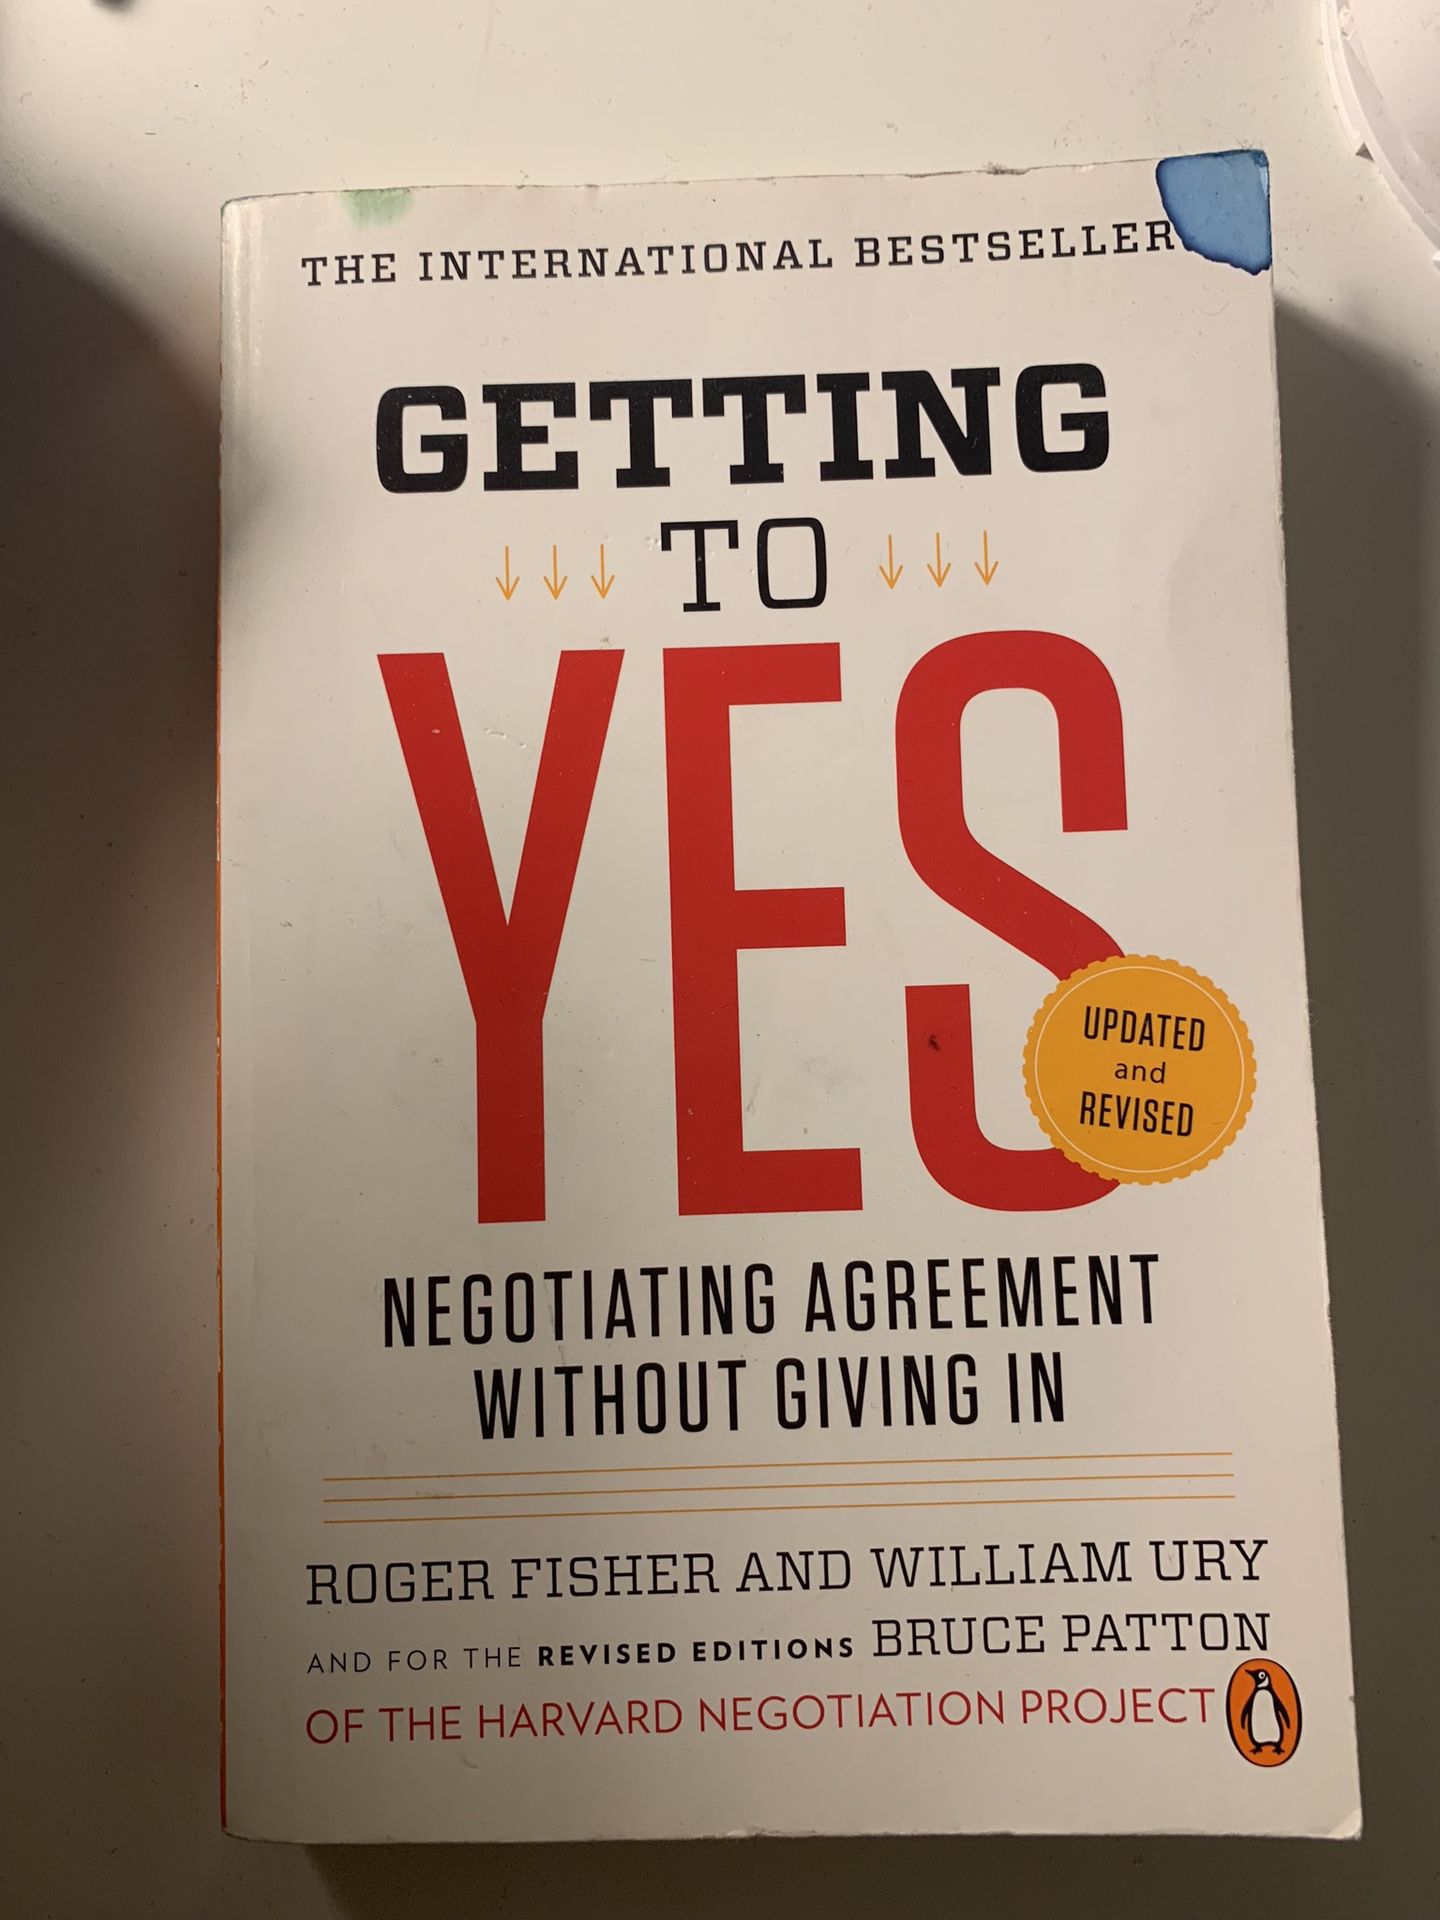 Getting To Yes by Roger Fisher and William Ury